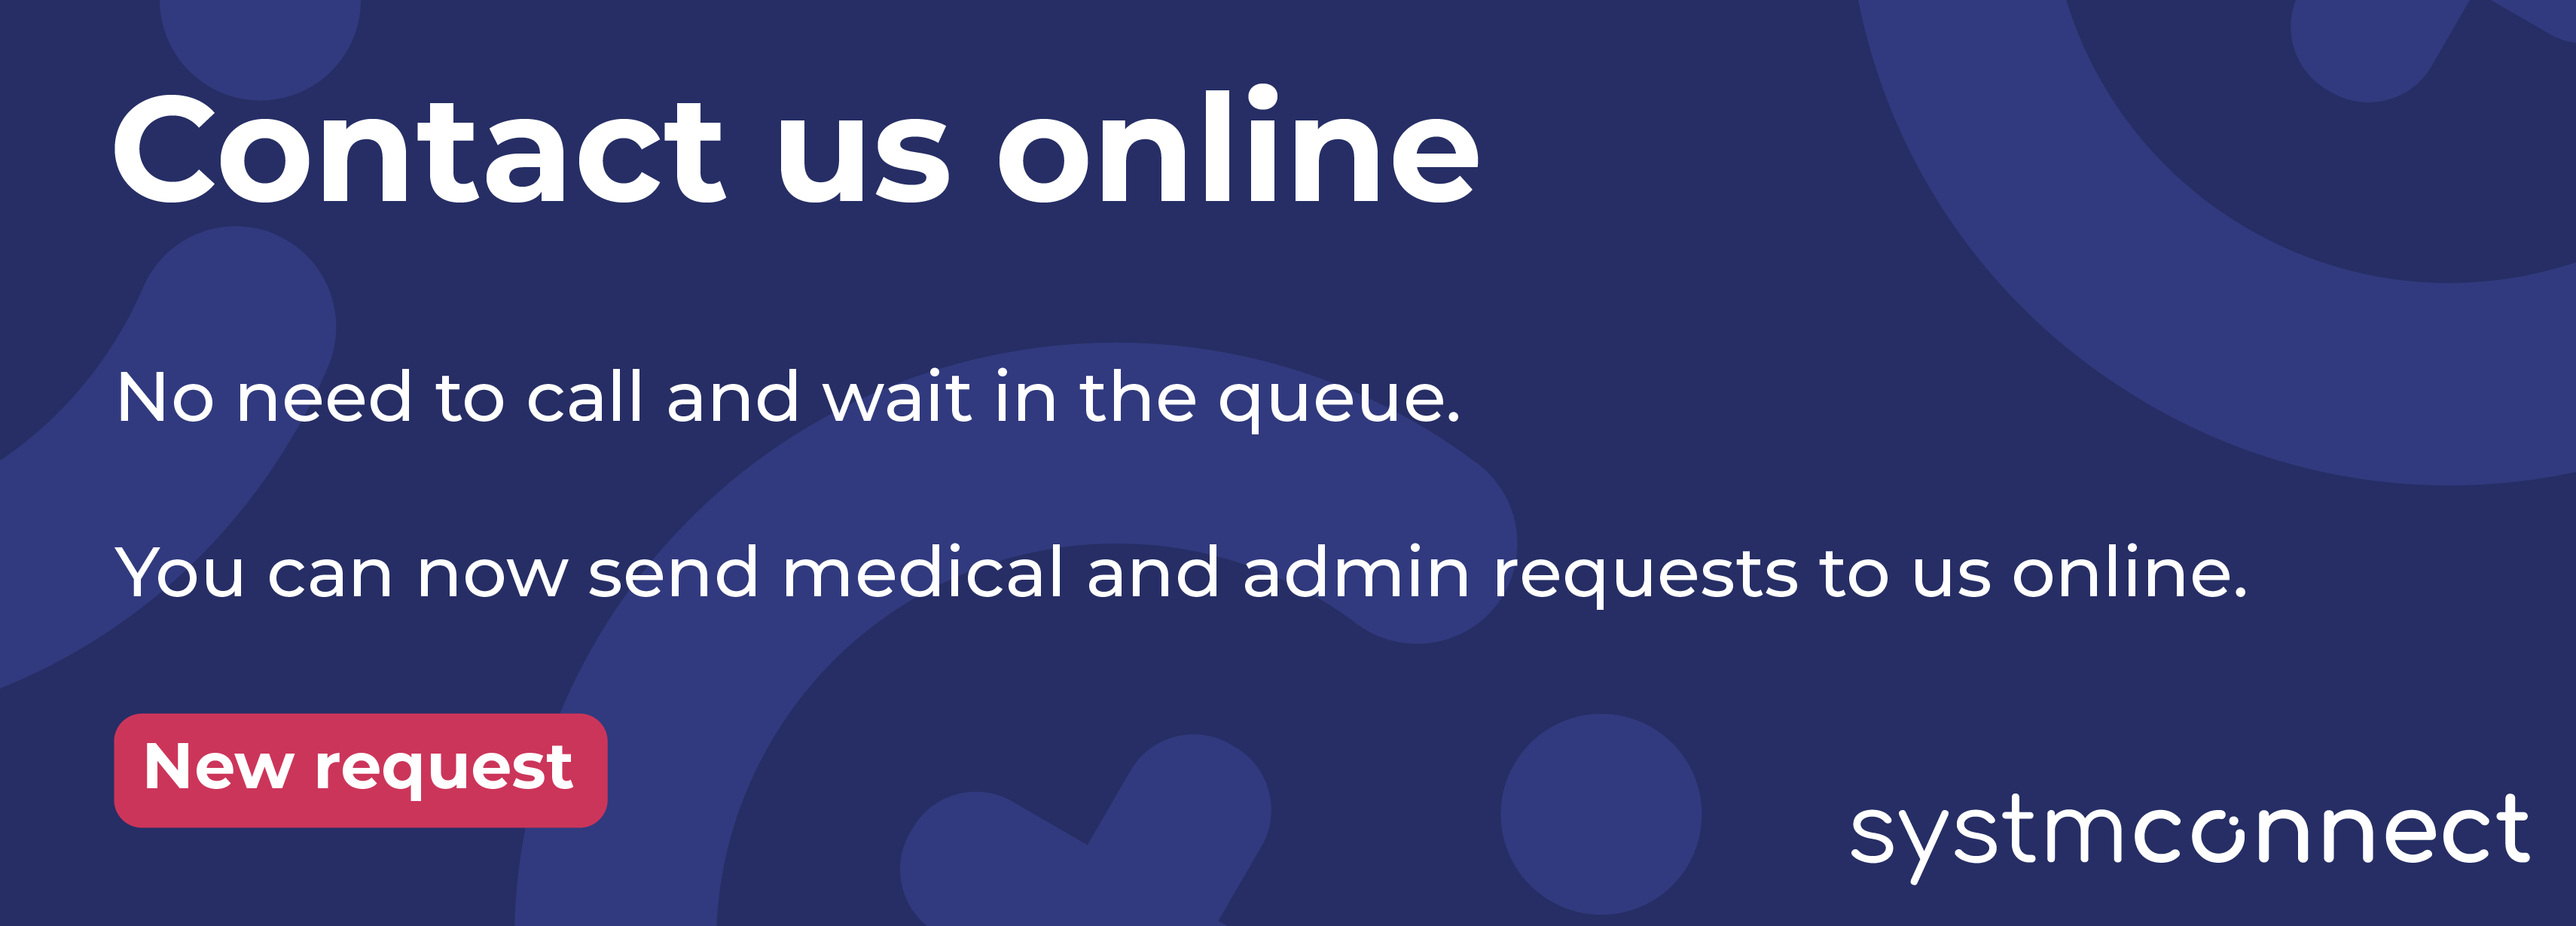 Contact us online for medical and admin requests